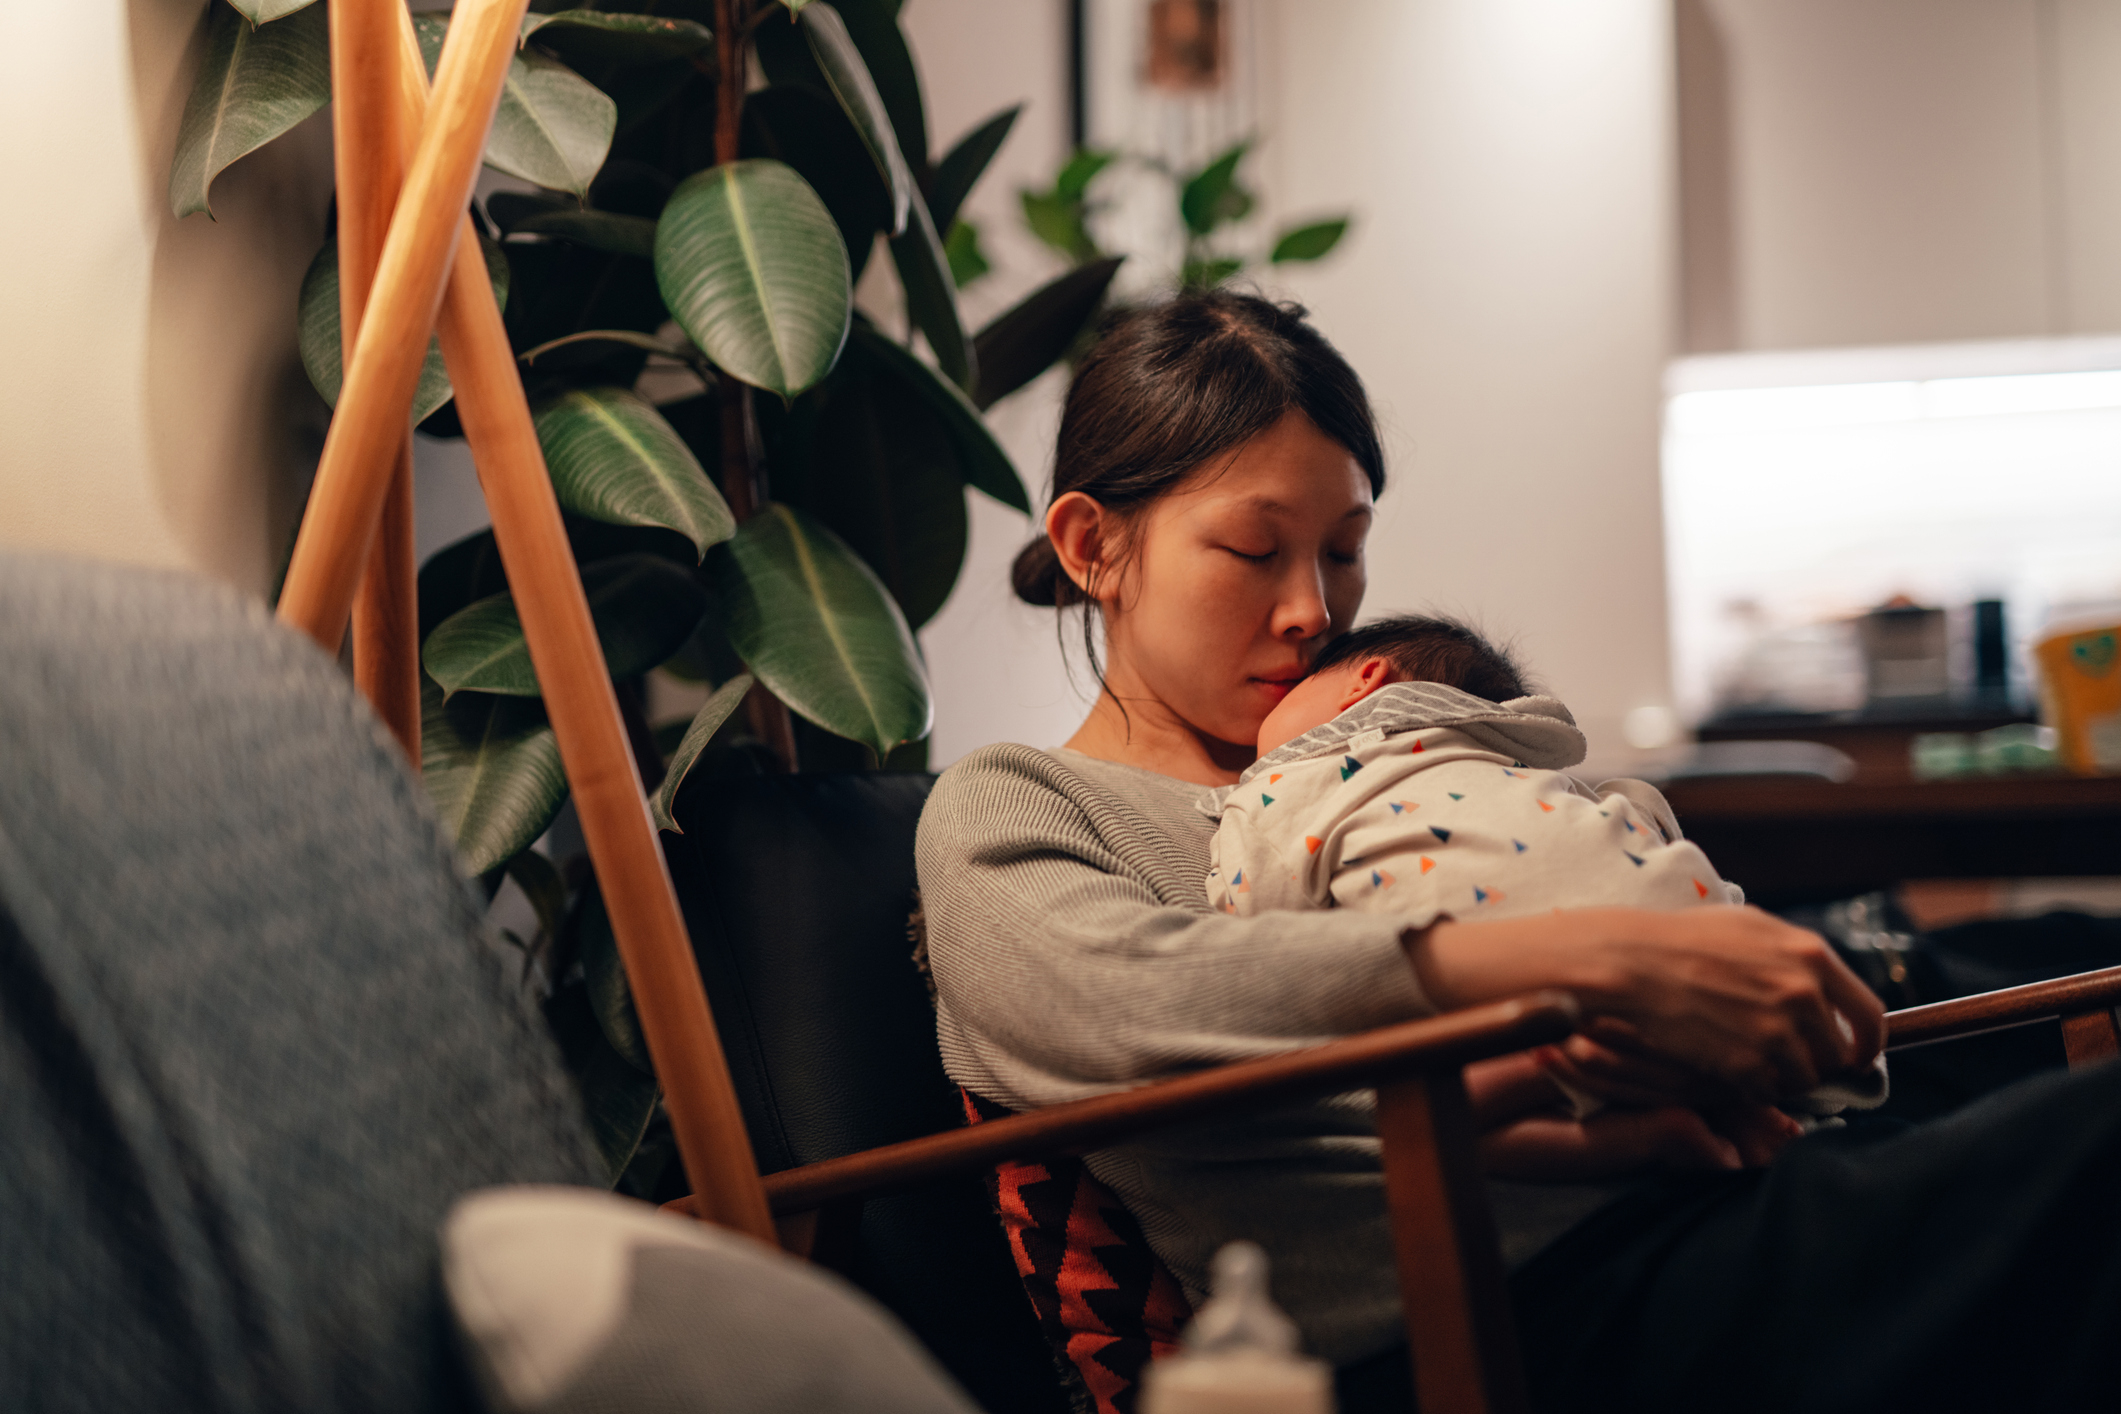 Mother sits cradling and looking at her baby in a warm indoor setting